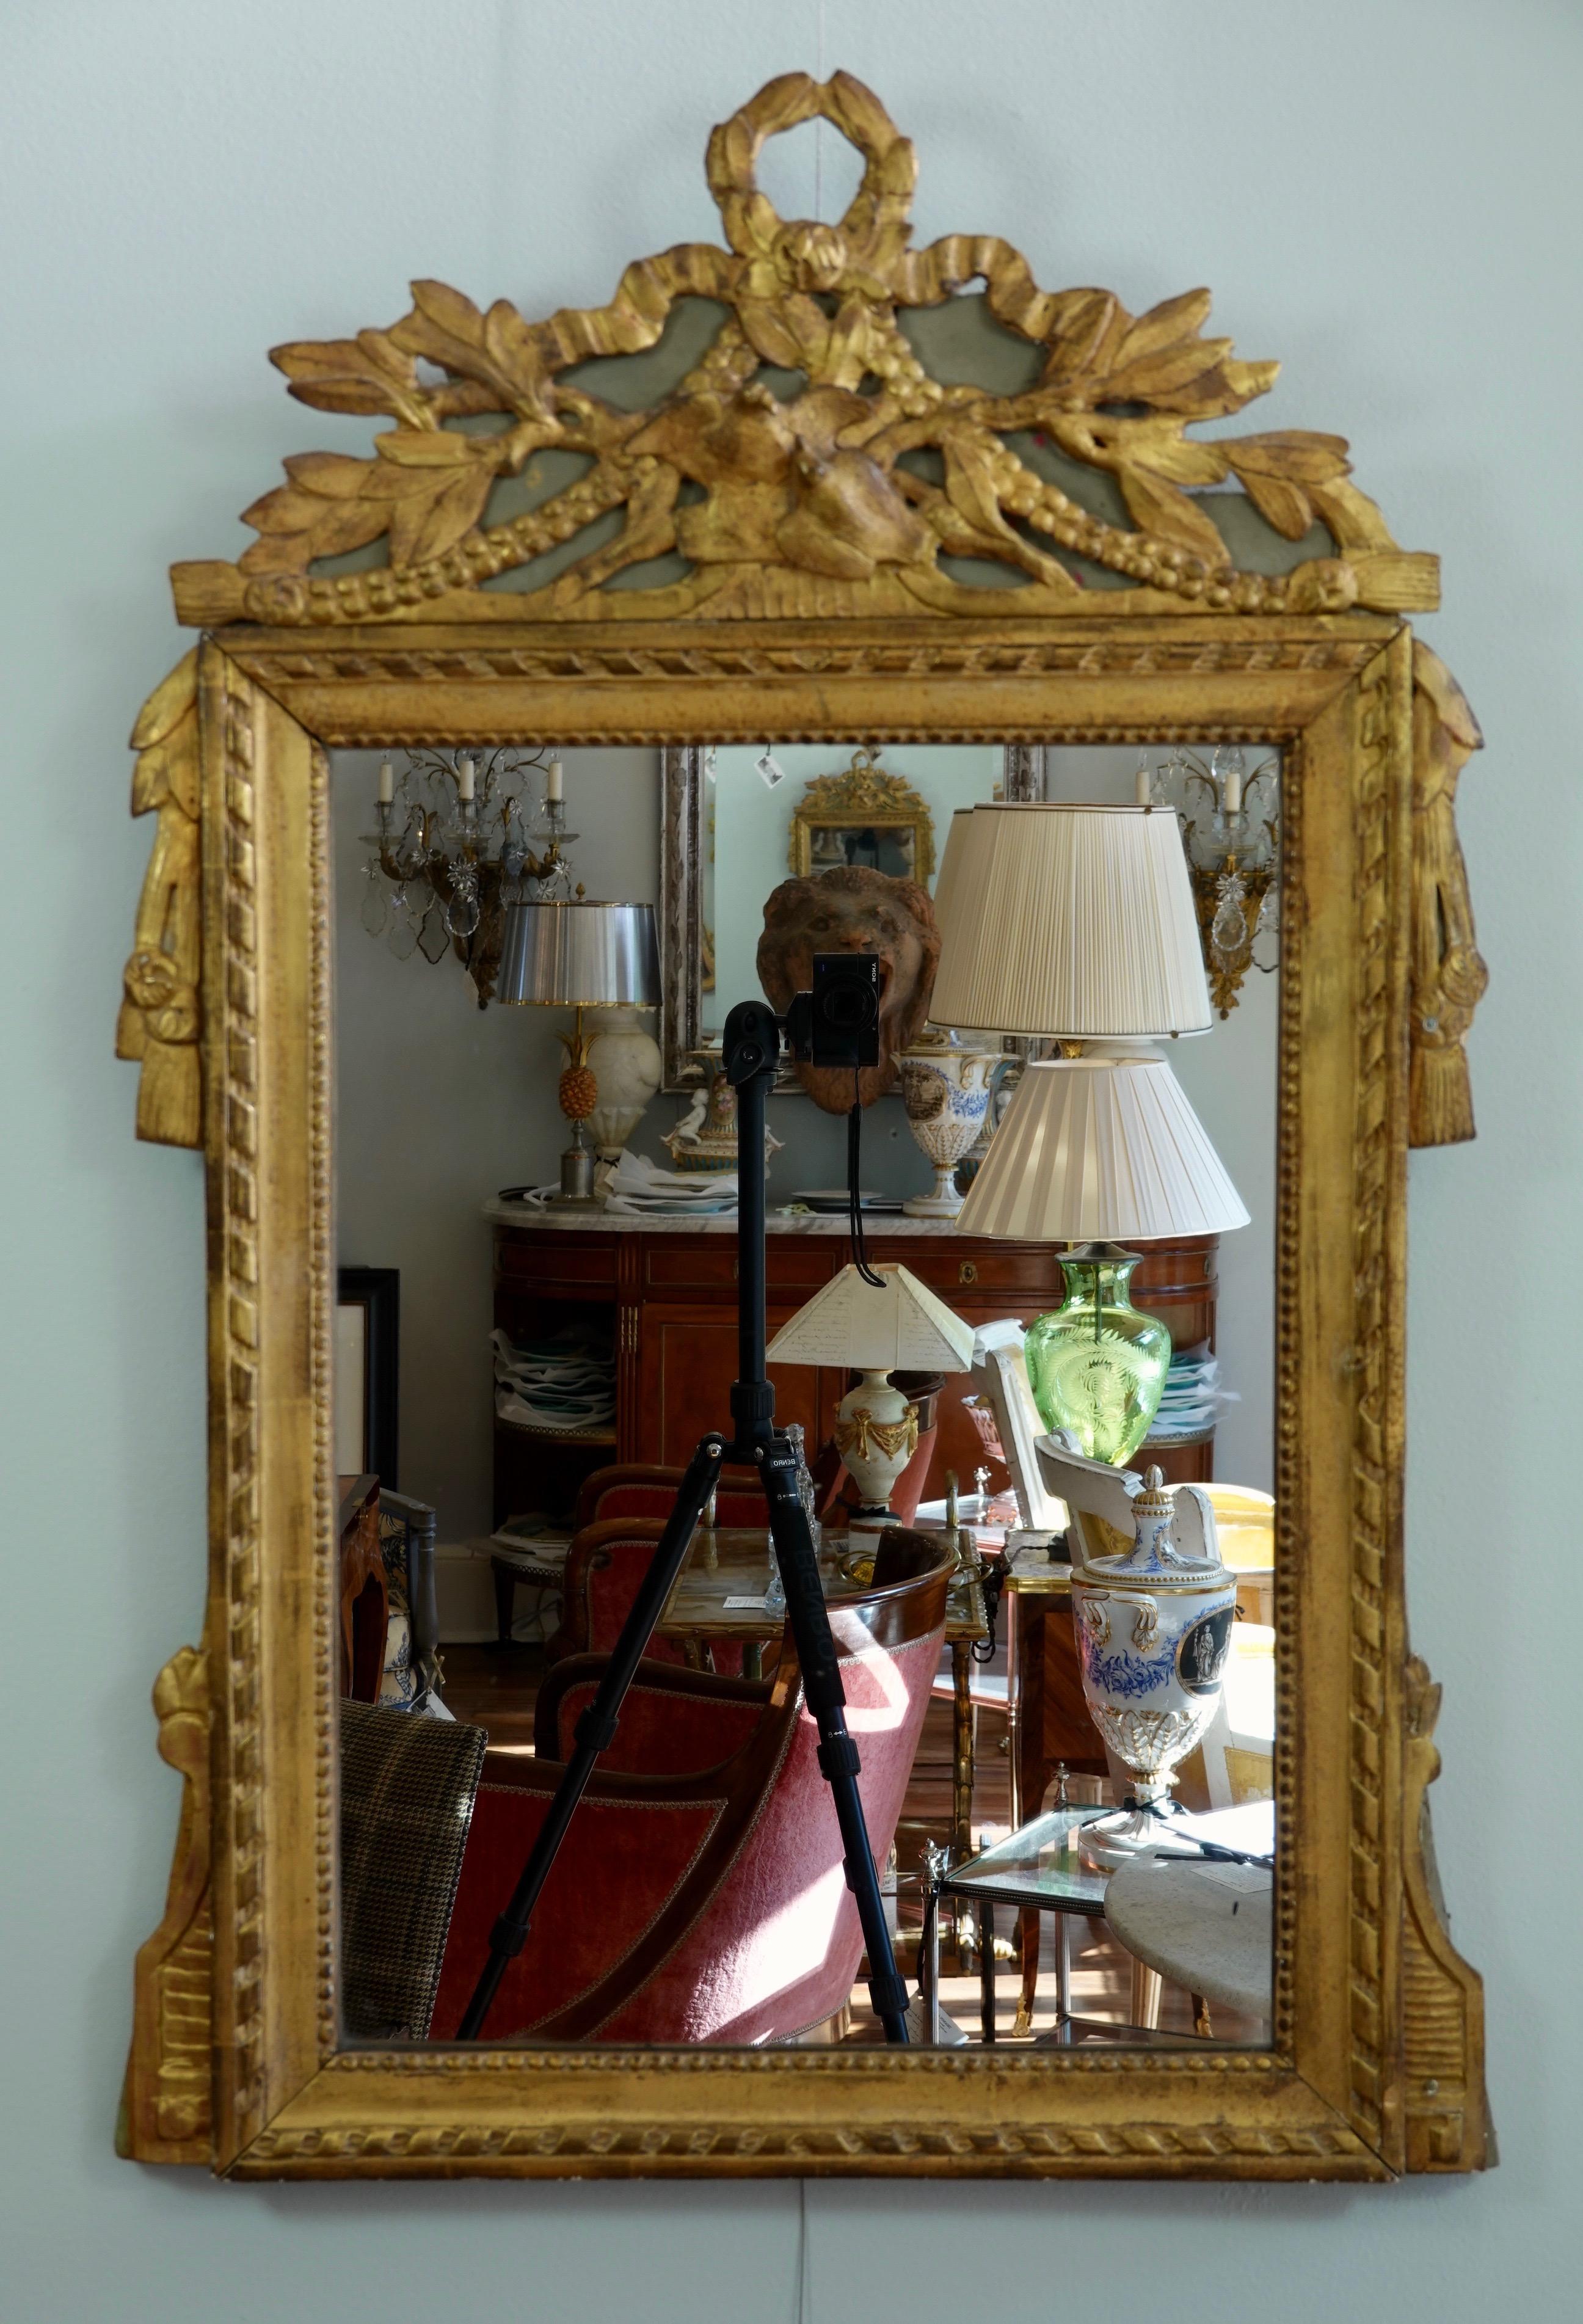 Very charming, French, Louis XVI period parcel gilt and painted marriage Trumeau mirror, featuring two birds kissing on the pediment. Other neoclassical ornaments include a laurel wreath and leaves, ribbon, swags, tassels and pearl beading. Wooden